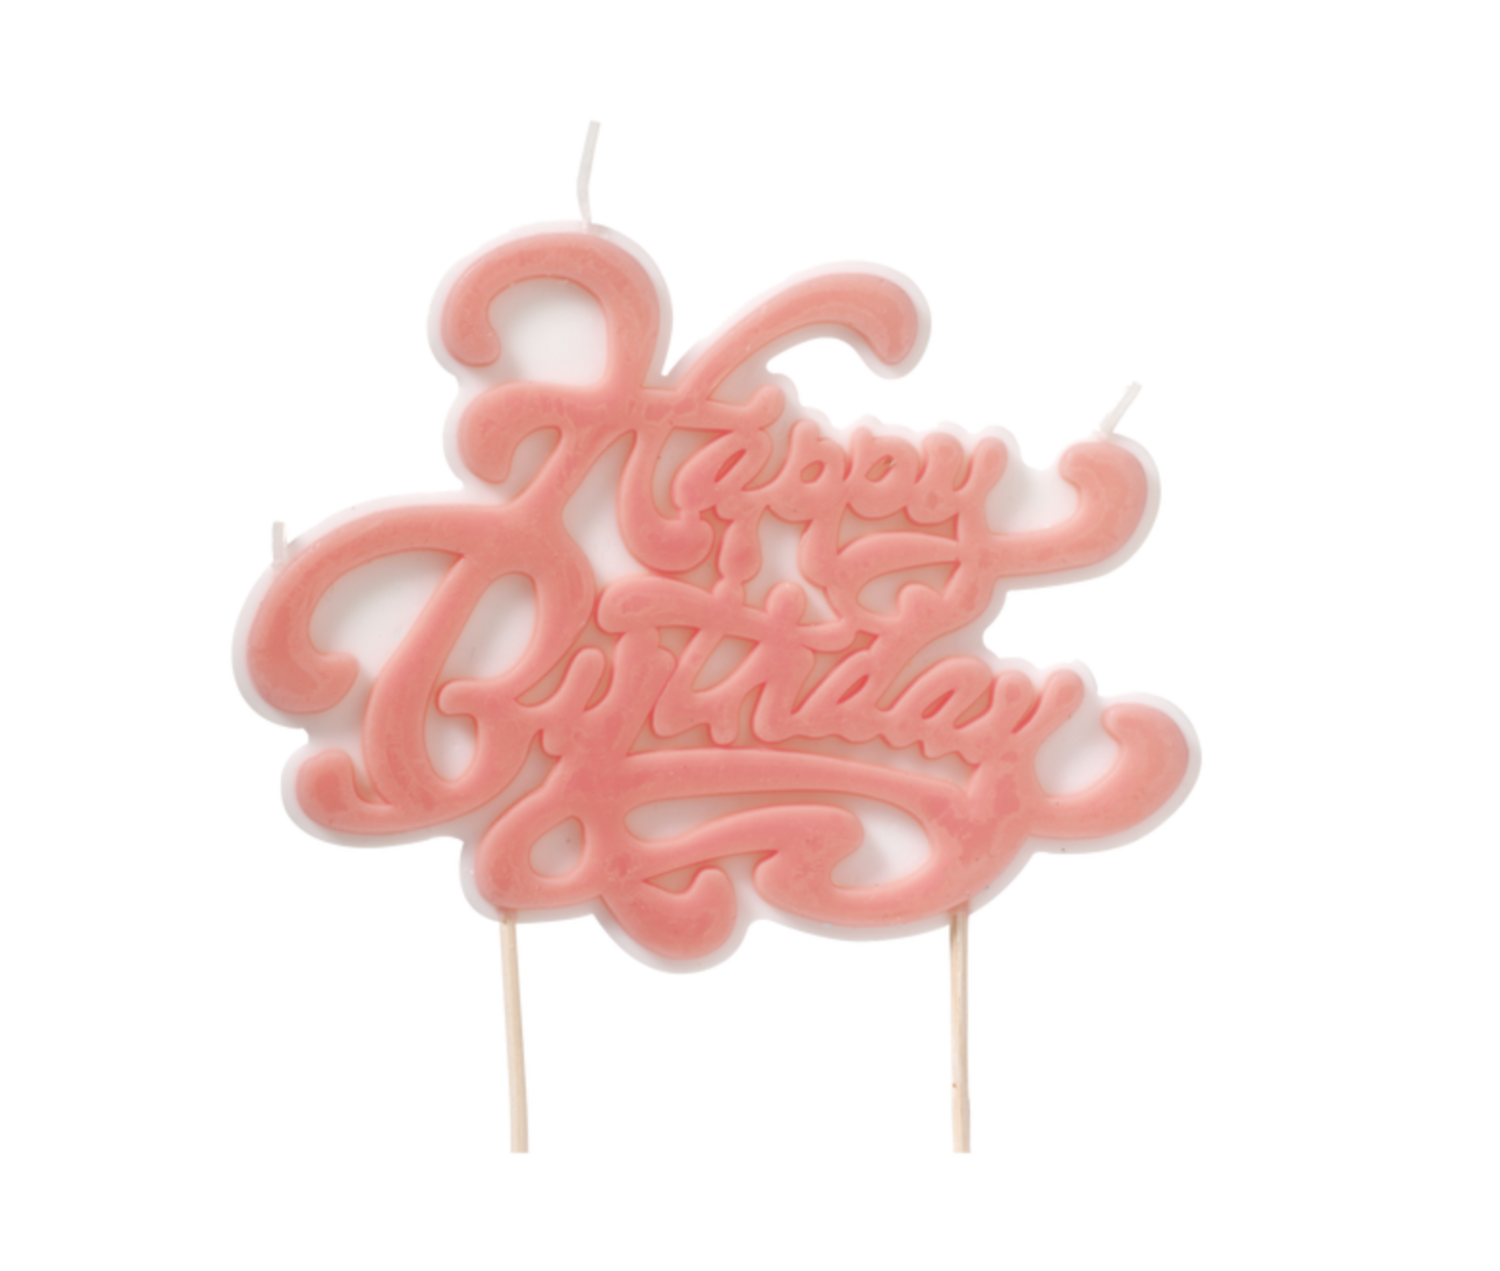 Happy Birthday Pink Candle